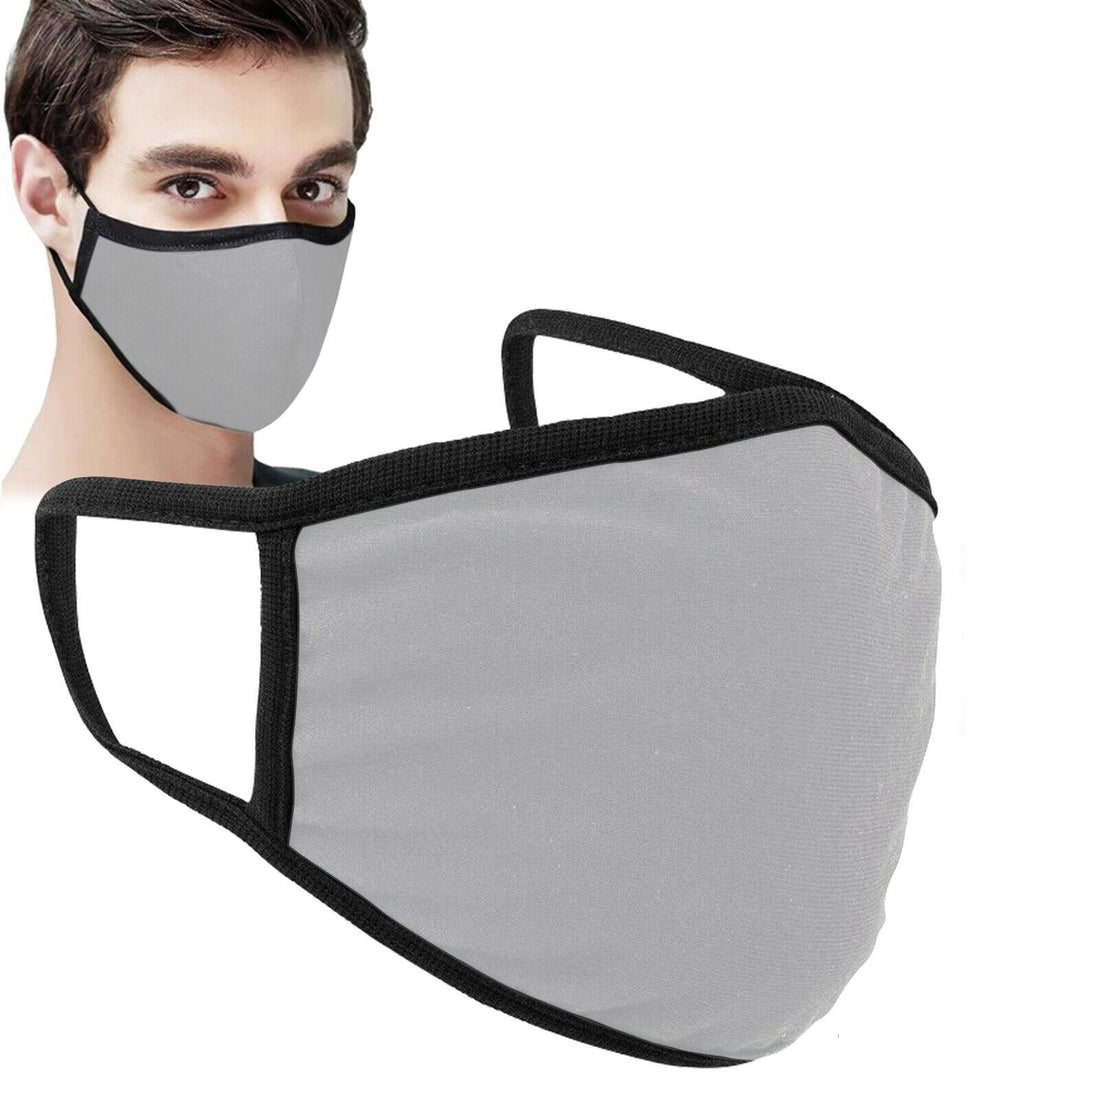 YNR Cotton Face Mask Protective Covering Mouth Masks Washable Reusable Black UK